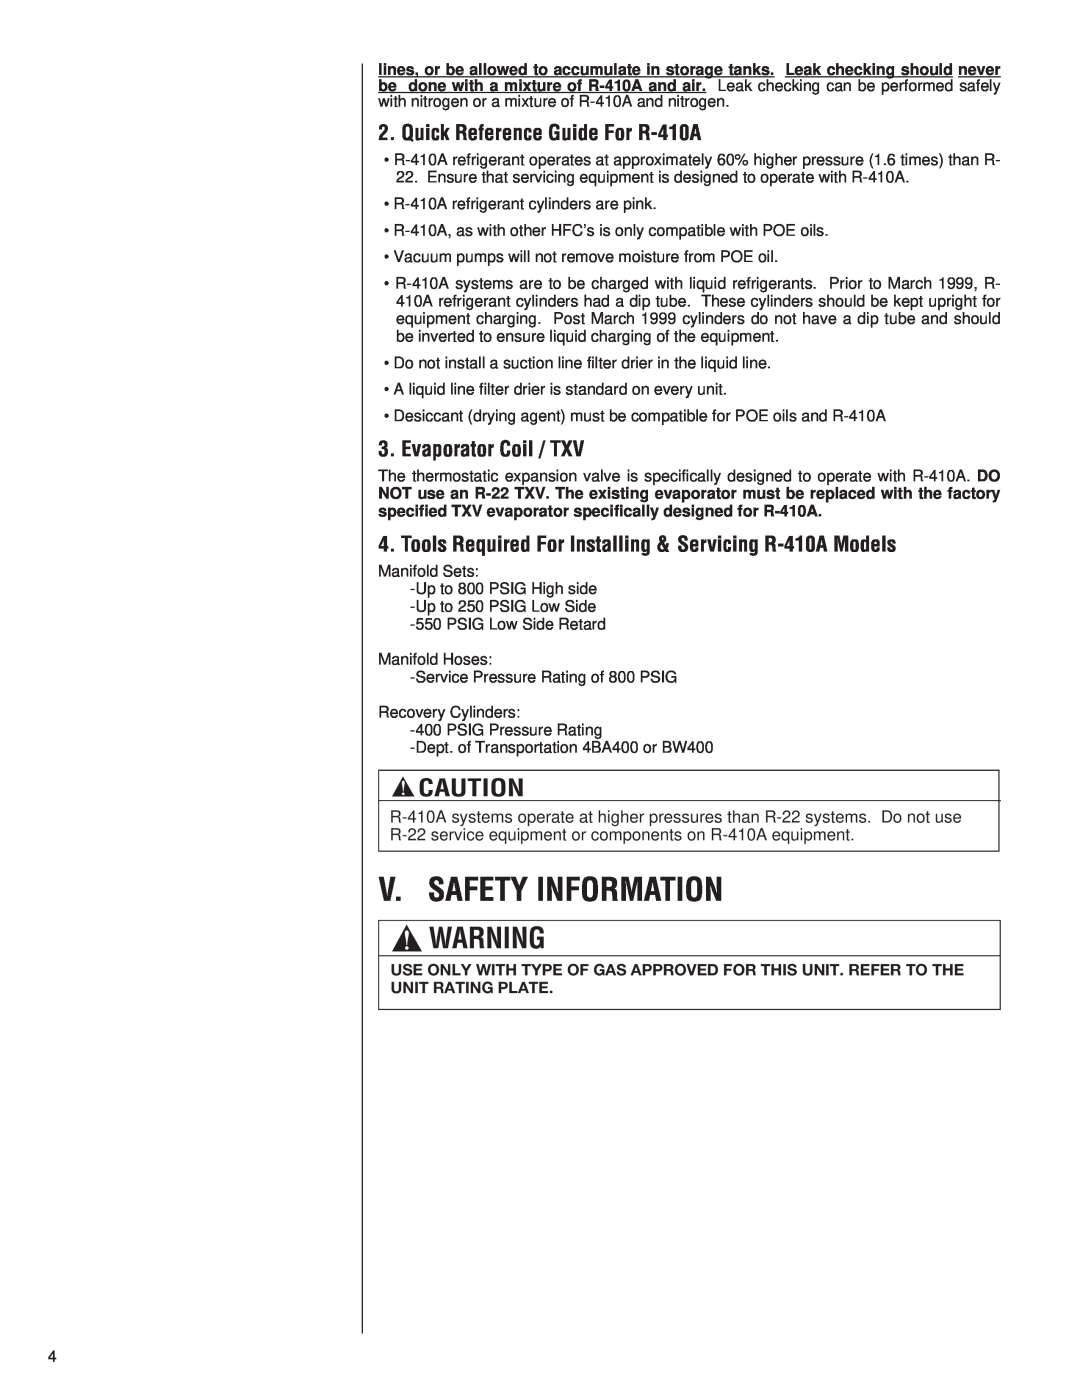 Heat Controller A-13 V. Safety Information, Quick Reference Guide For R-410A, Evaporator Coil / TXV 